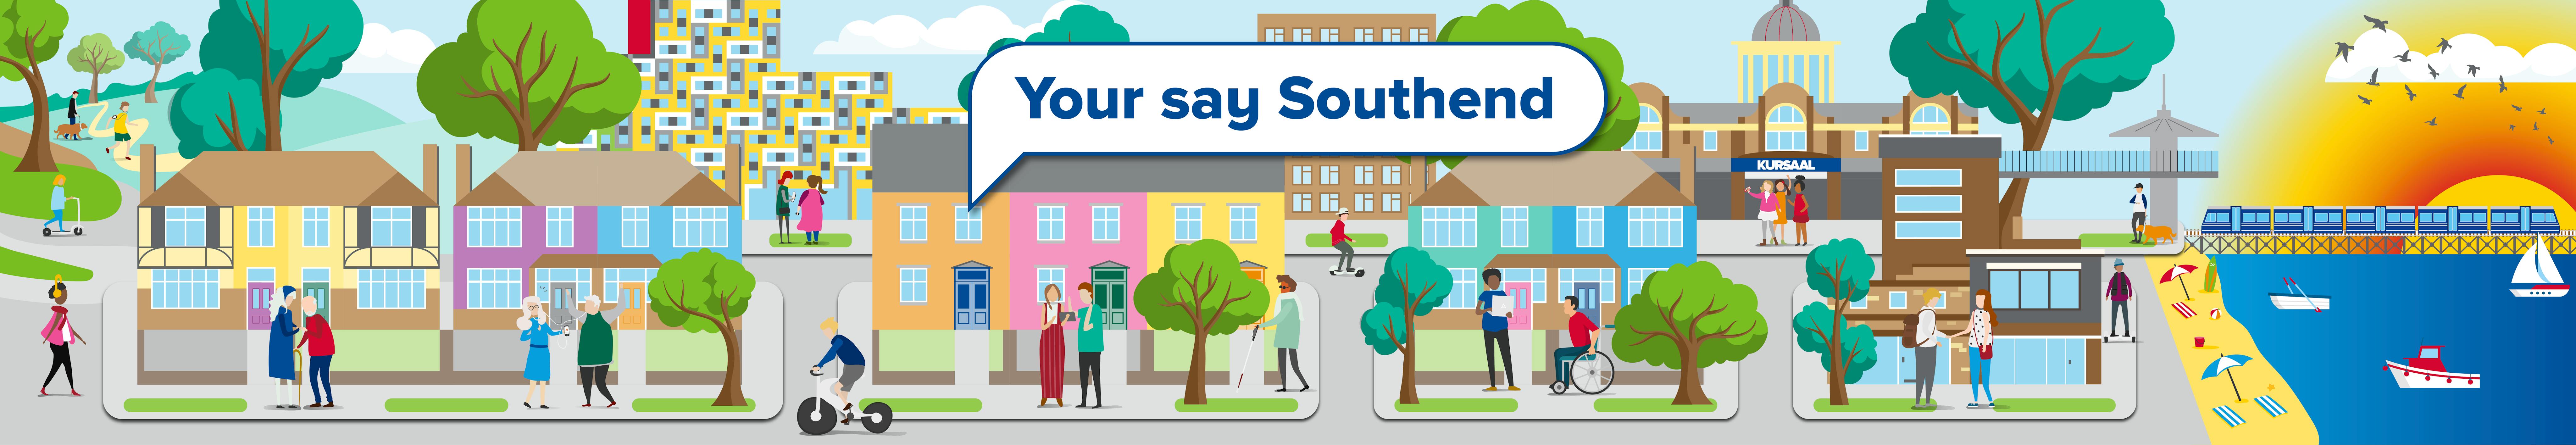 Your say Southend banner with people socialising in the town